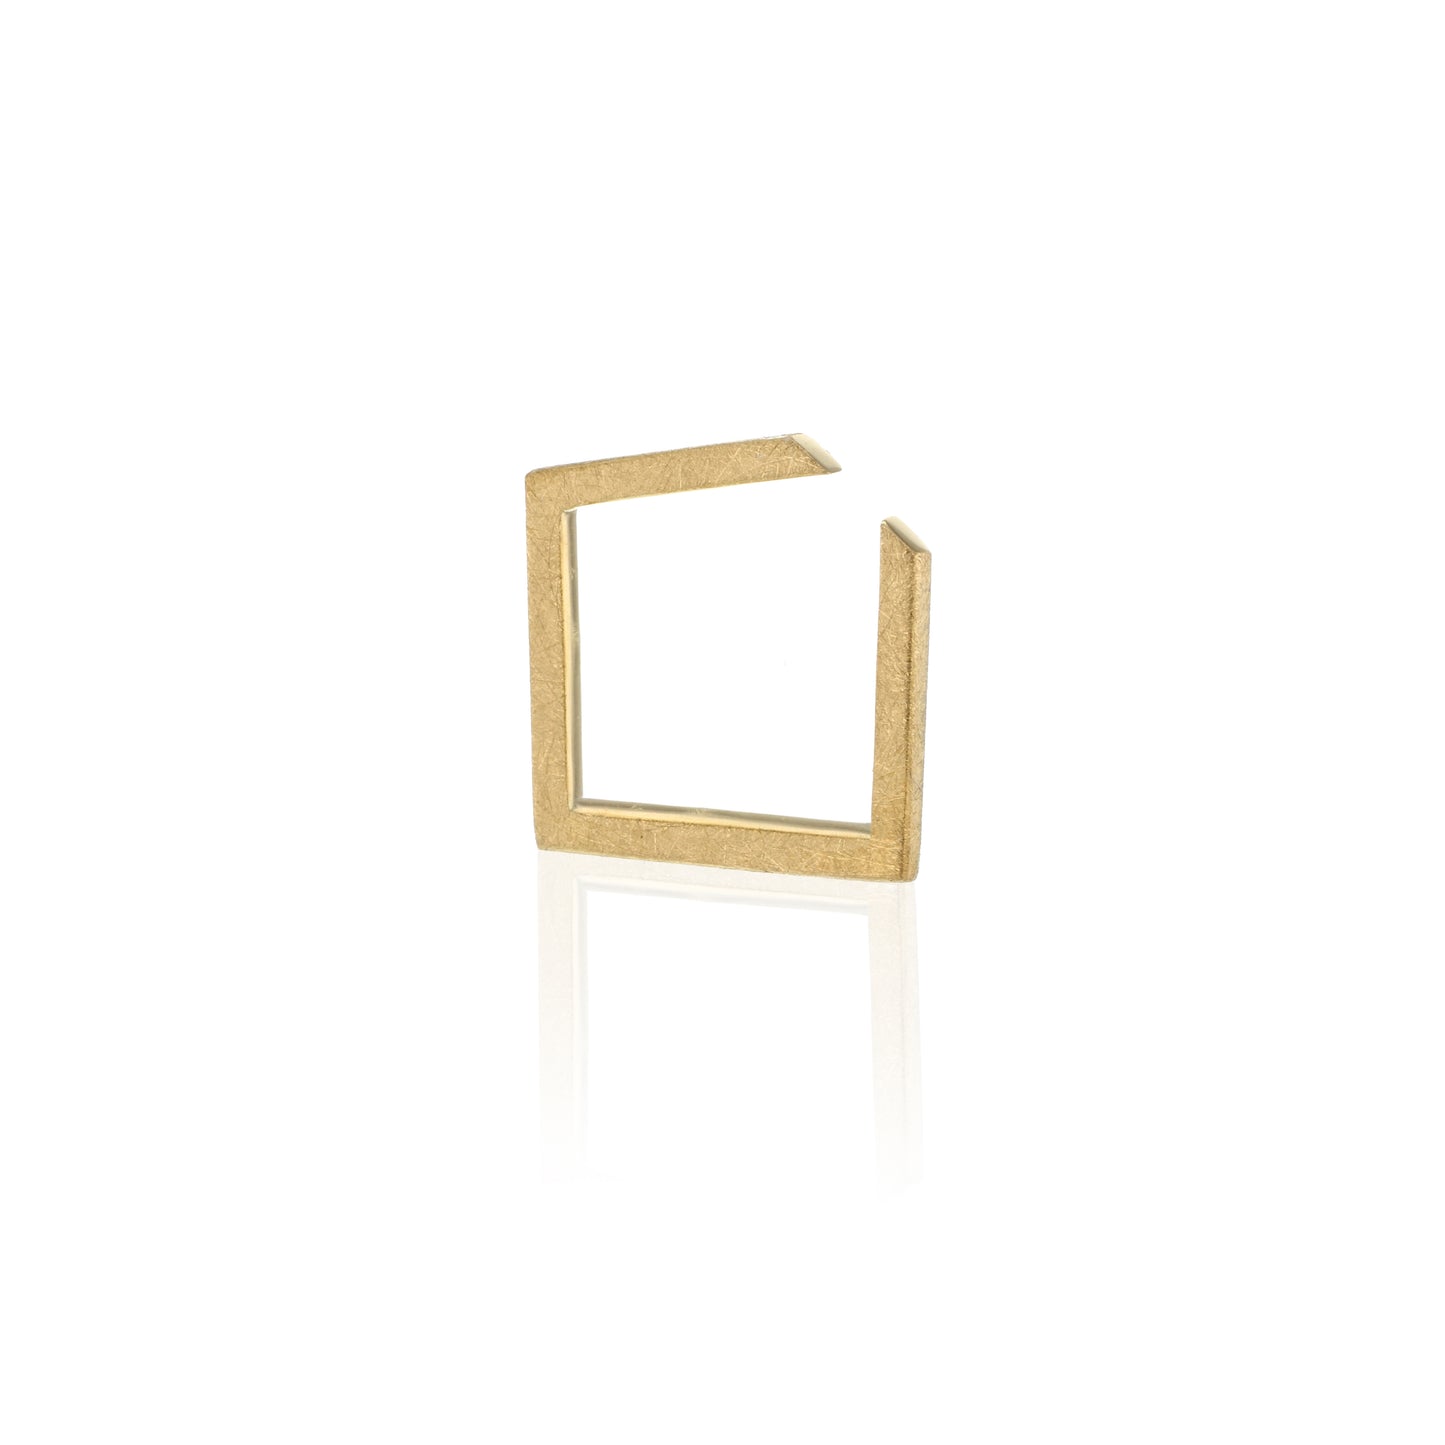 Square in the eye, Ring